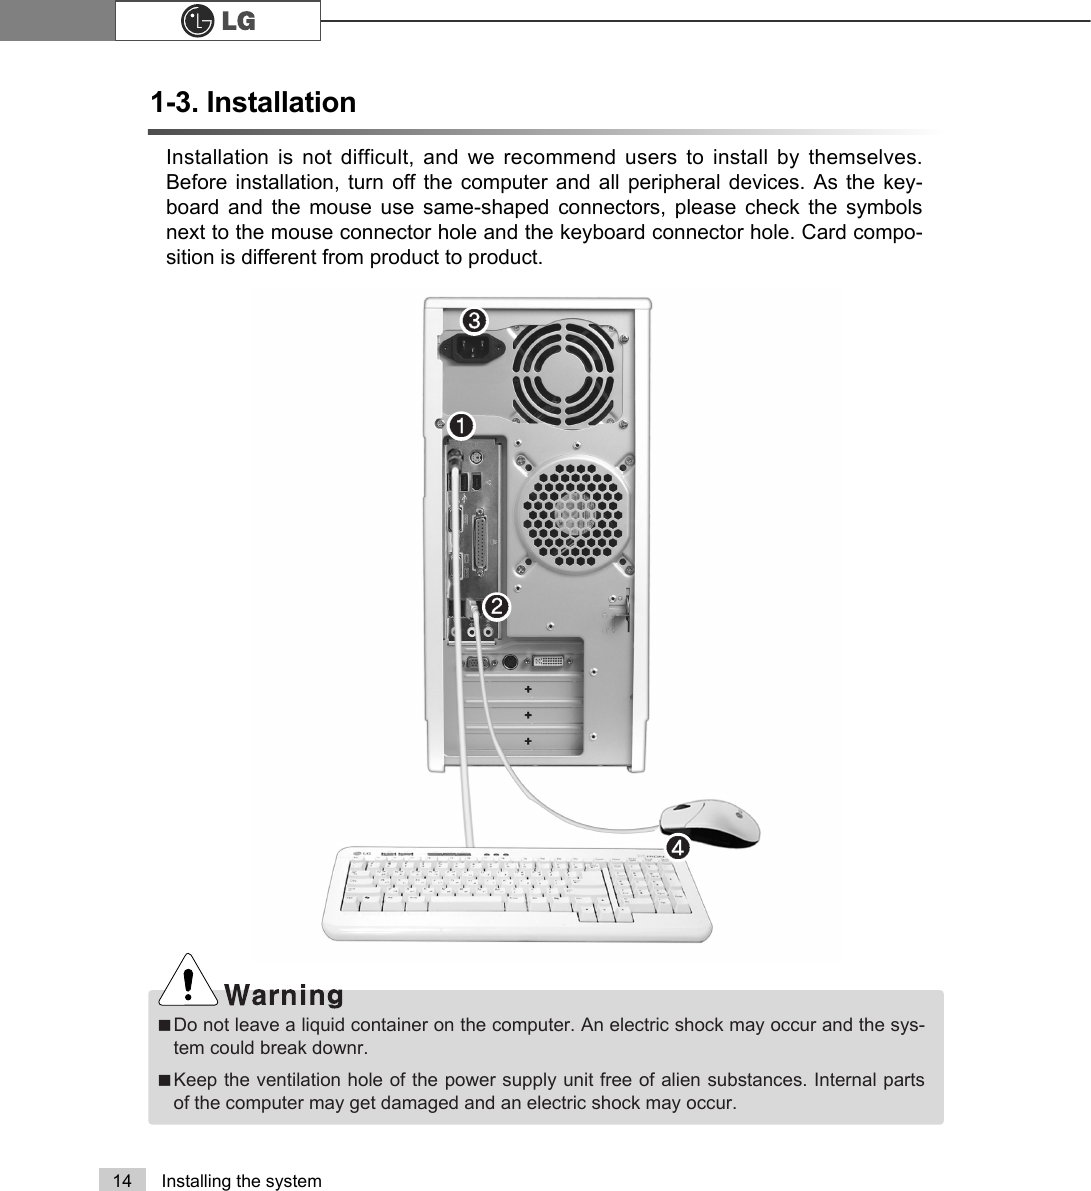 ℘ℙℚℛ14 Installing the system1-3. InstallationInstallation is not difficult, and we recommend users to install by themselves.Before installation, turn off the computer and all peripheral devices. As the key-board and the mouse use same-shaped connectors, please check the symbolsnext to the mouse connector hole and the keyboard connector hole. Card compo-sition is different from product to product.ãDo not leave a liquid container on the computer. An electric shock may occur and the sys-tem could break downr.ãKeep the ventilation hole of the power supply unit free of alien substances. Internal partsof the computer may get damaged and an electric shock may occur.